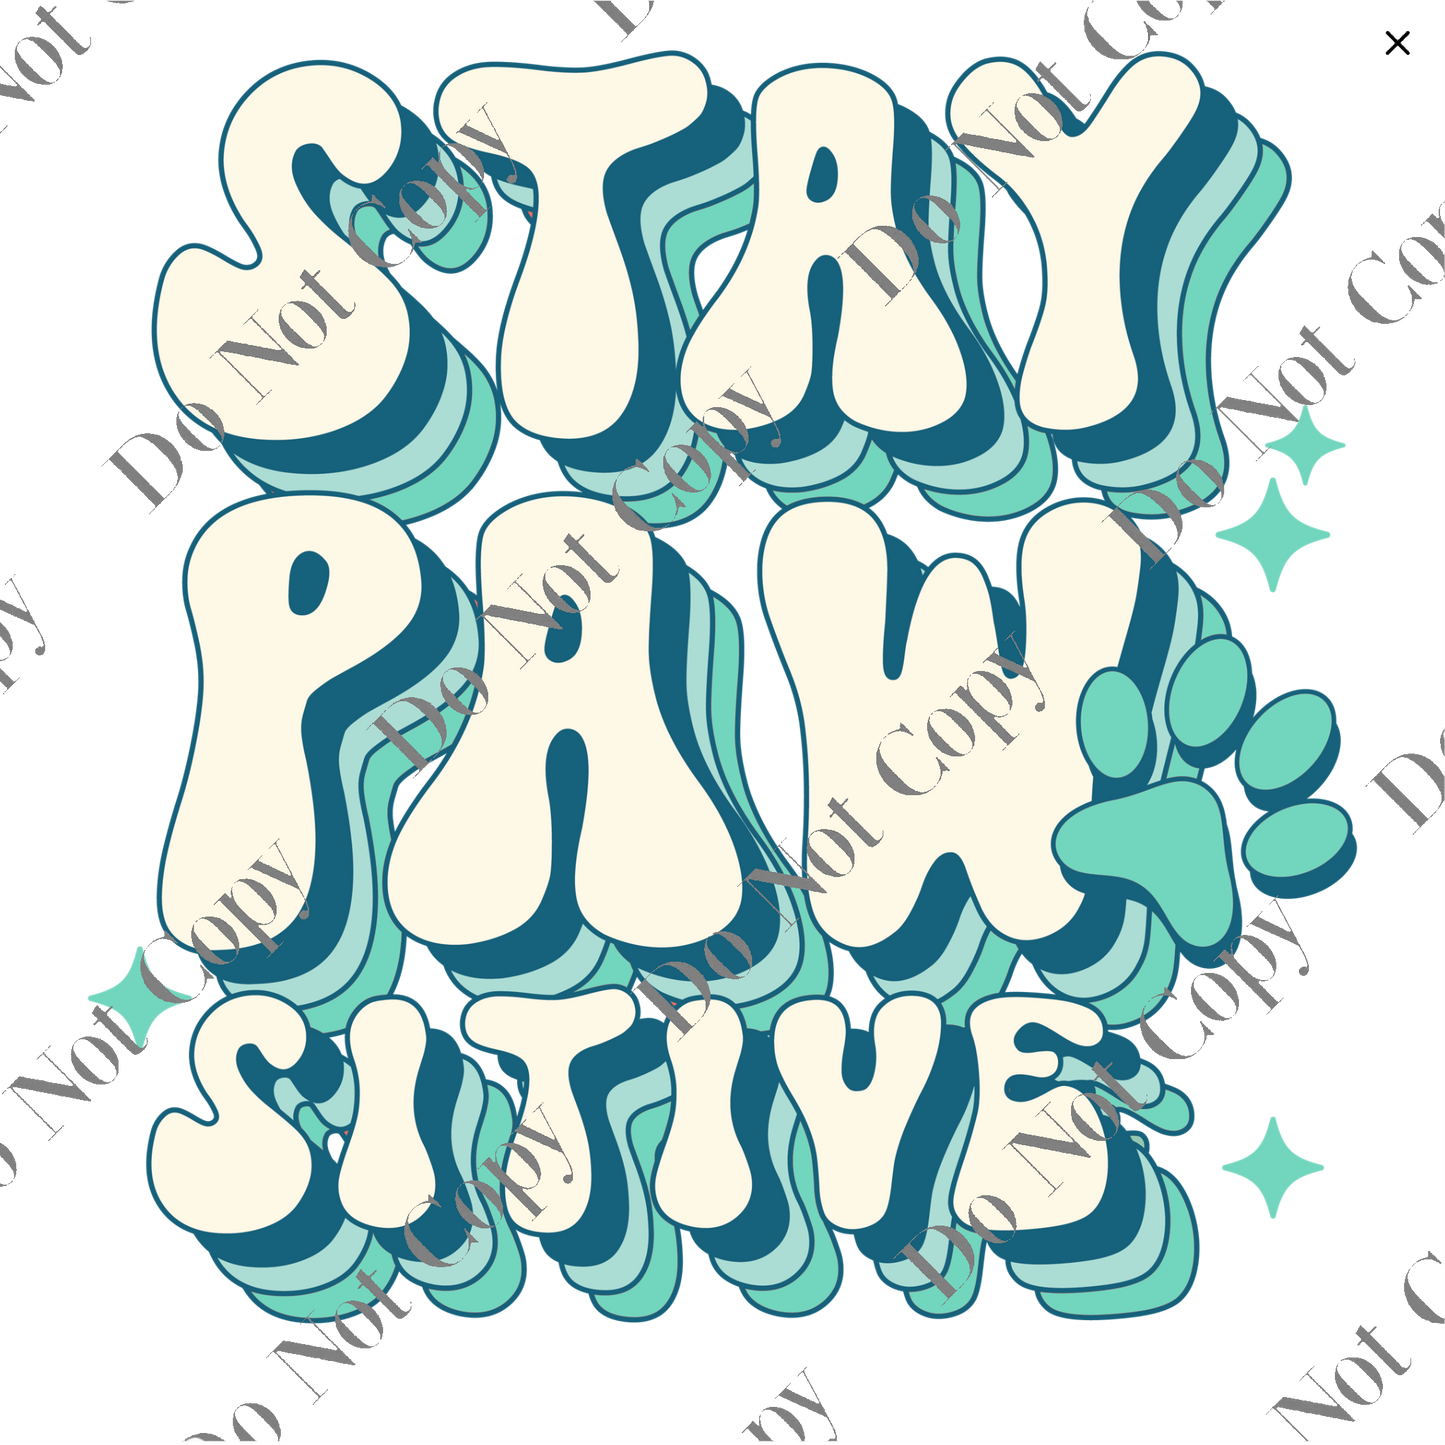 Clear cast Decal -  Stay Pawsitive